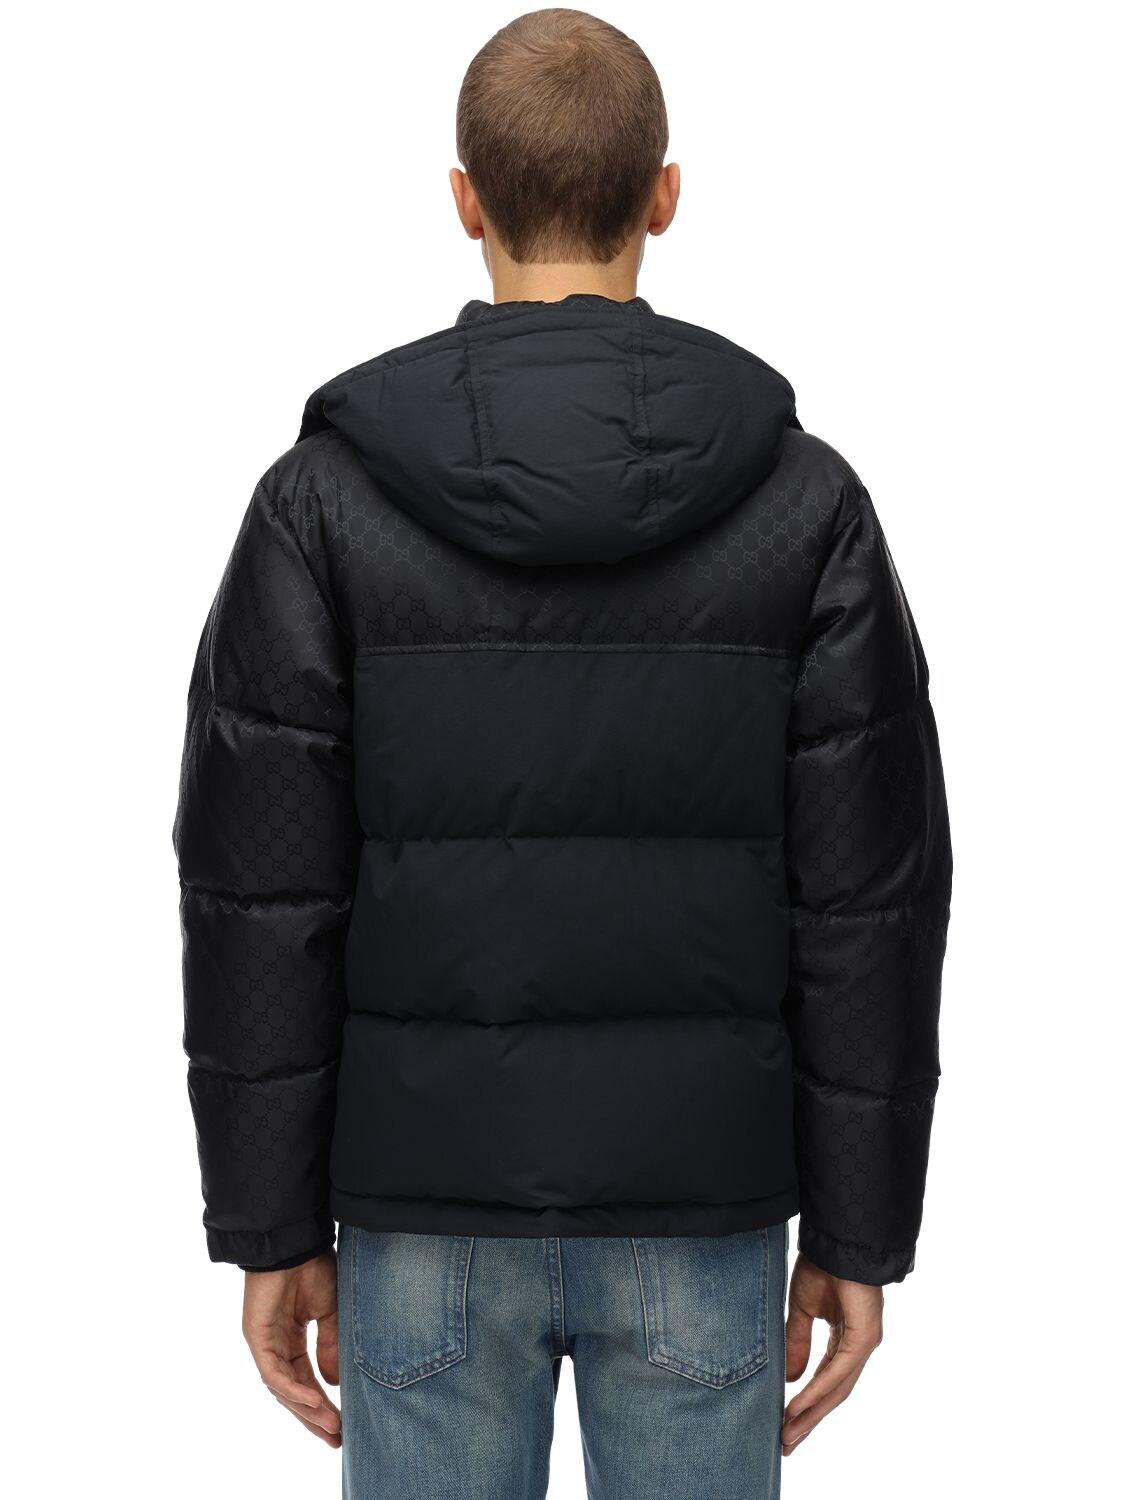 Gucci Synthetic Gg Logo Cropped Down Jacket W/ Hood in Black for Men - Lyst